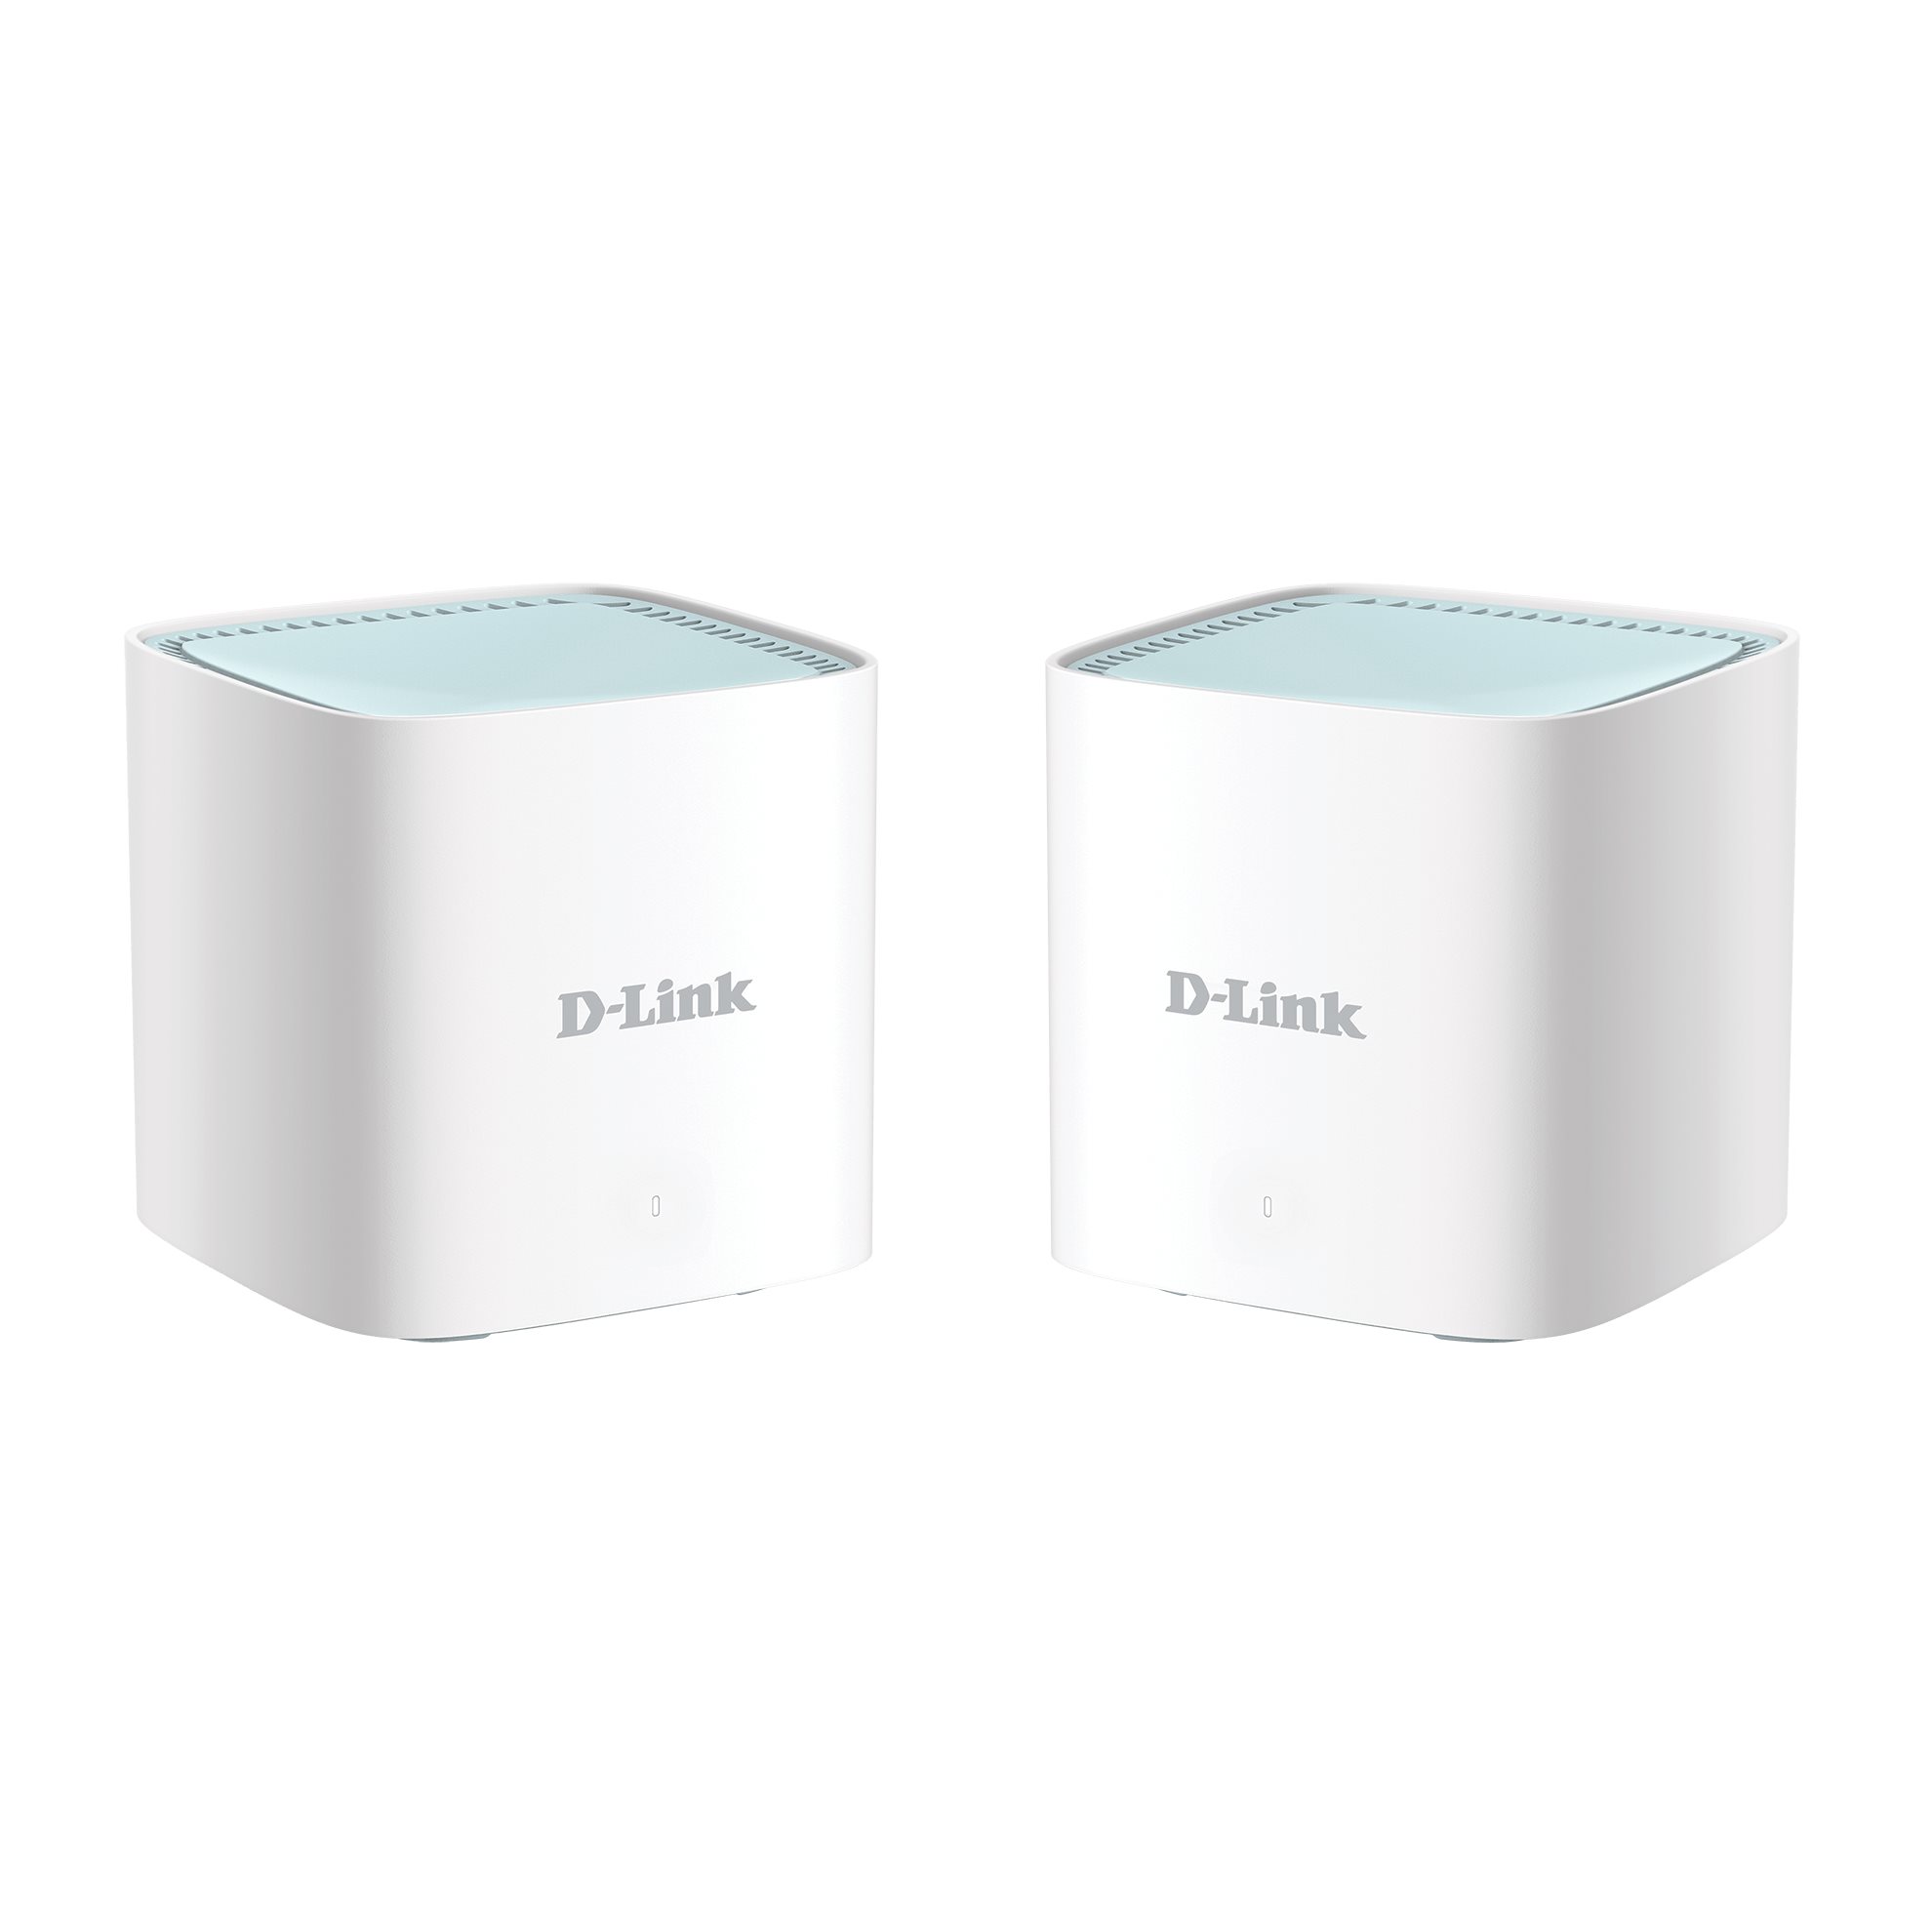   Systme WiFi Mesh   Solution MESH WiFi 6 Eagle Pro AX1500 (Pack de 2) M15-2